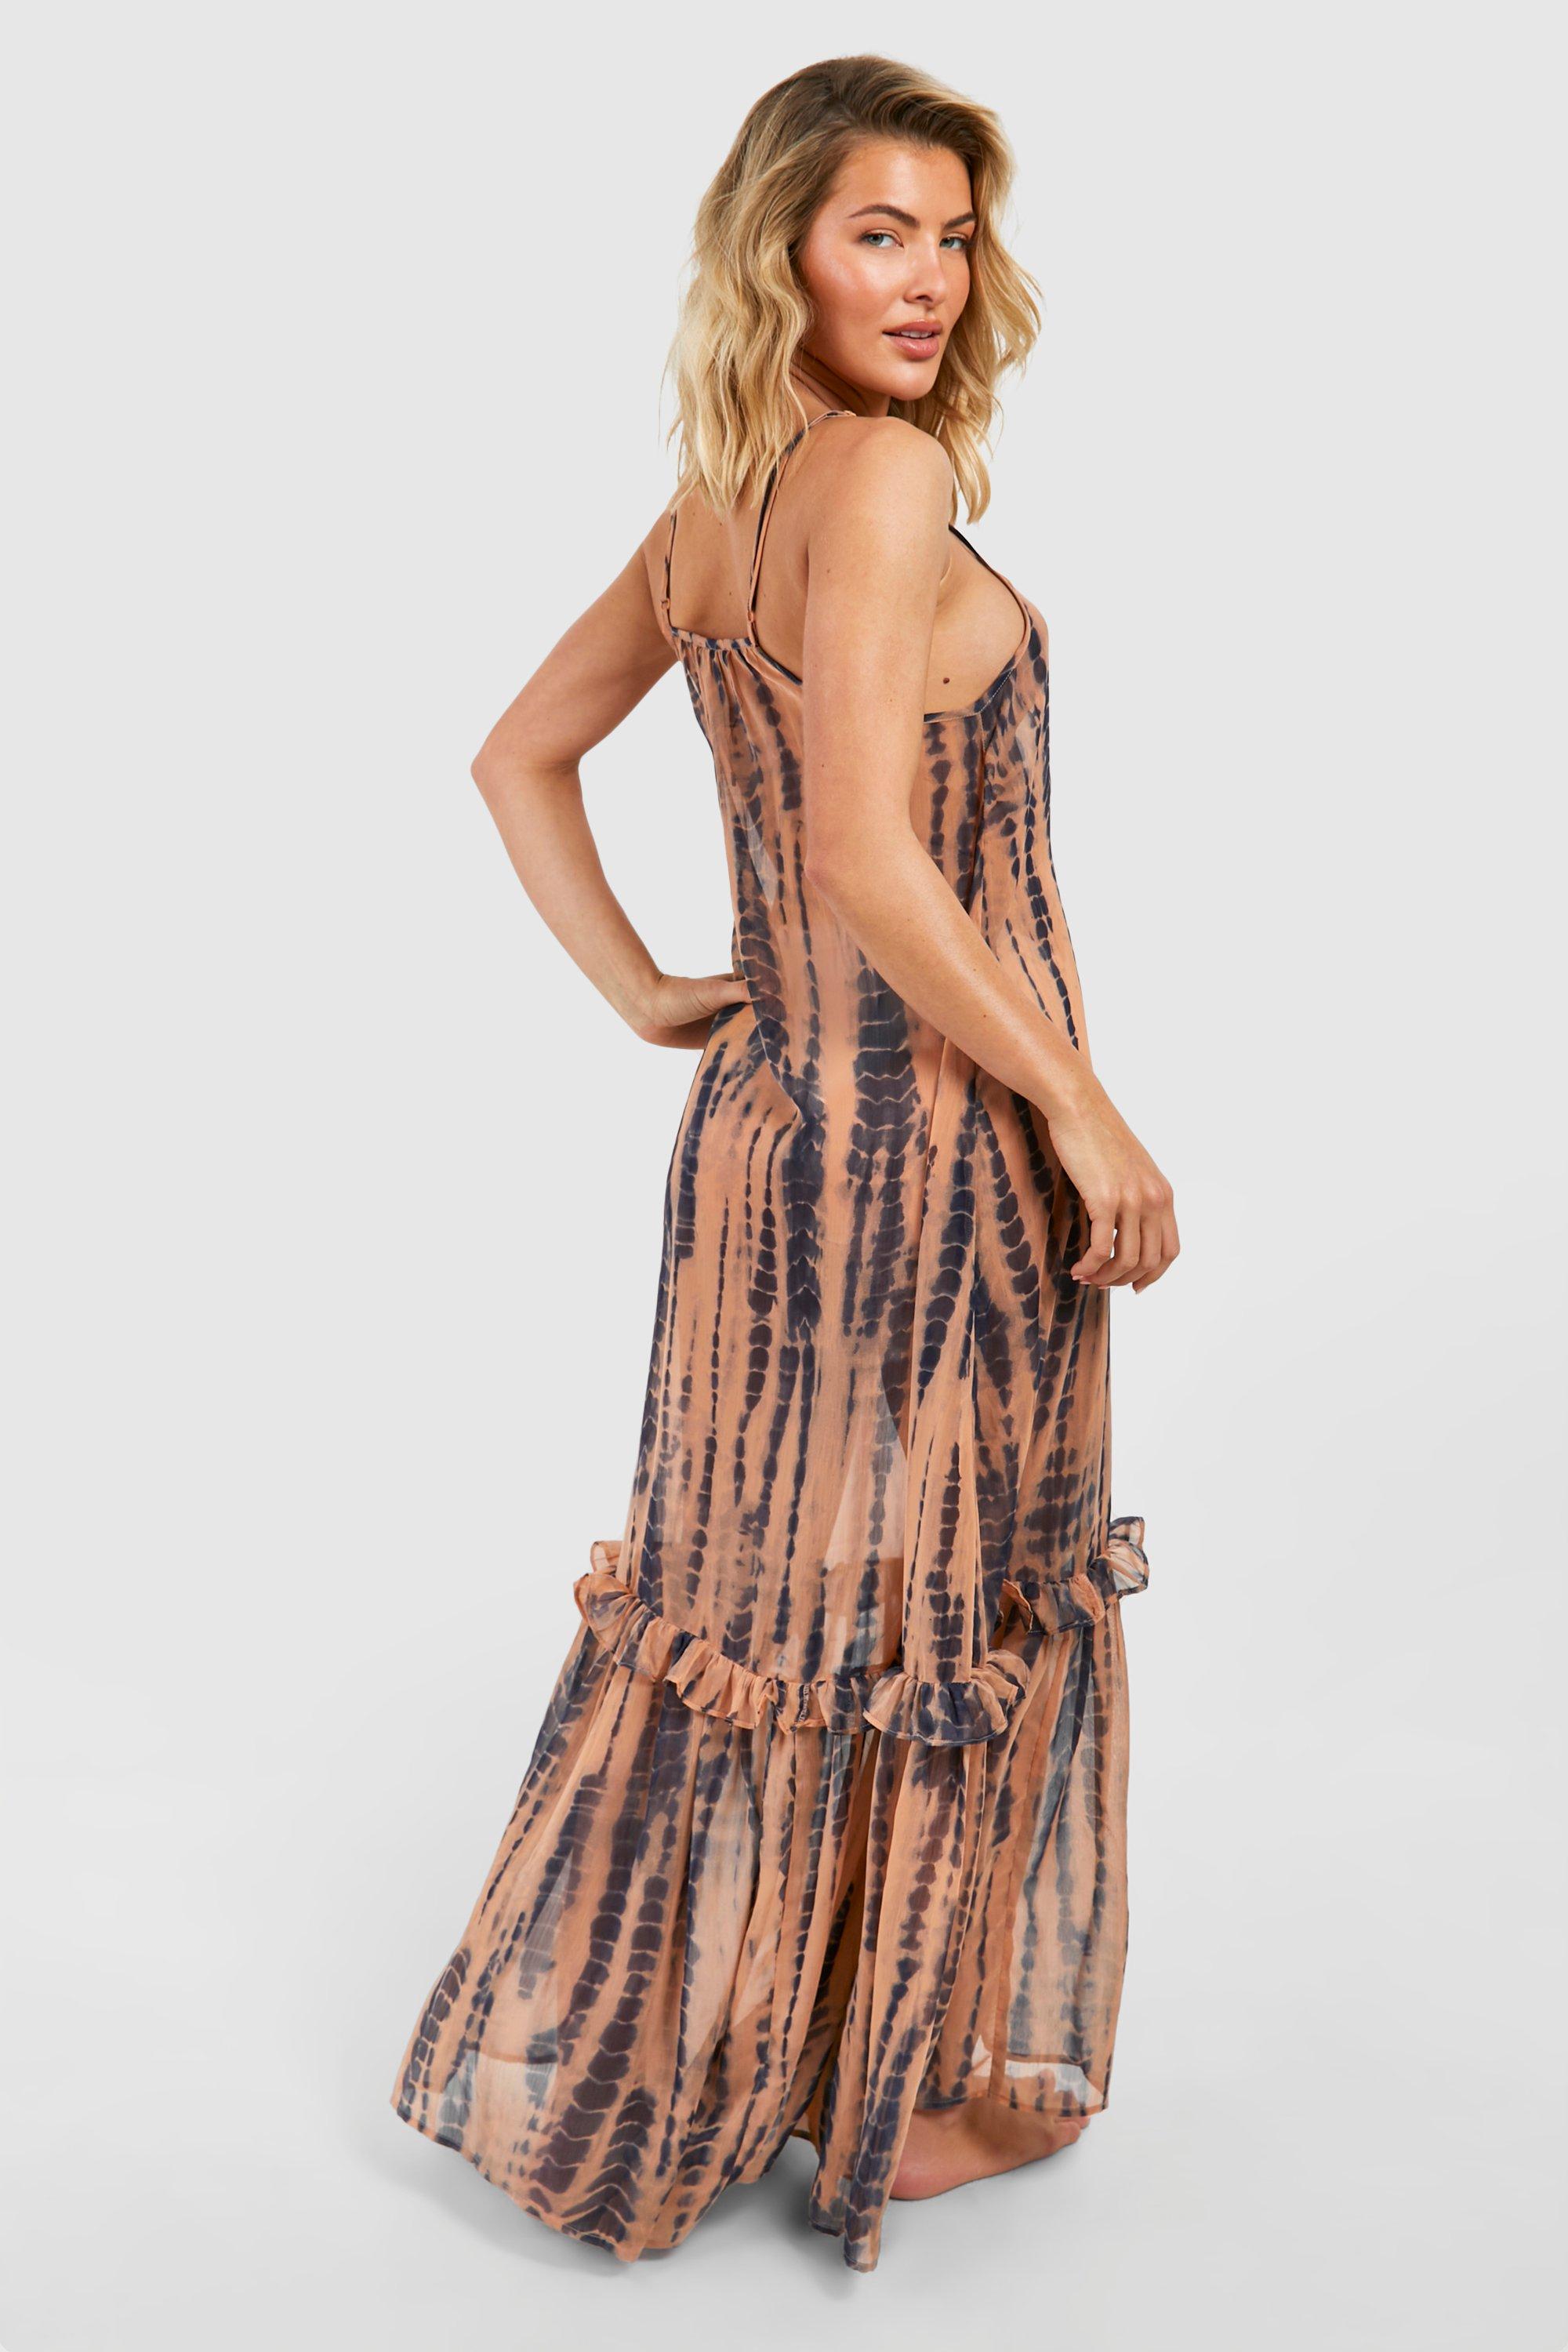 Dress, Ruched Strappy Tie-Dye Summer Maxi Dress